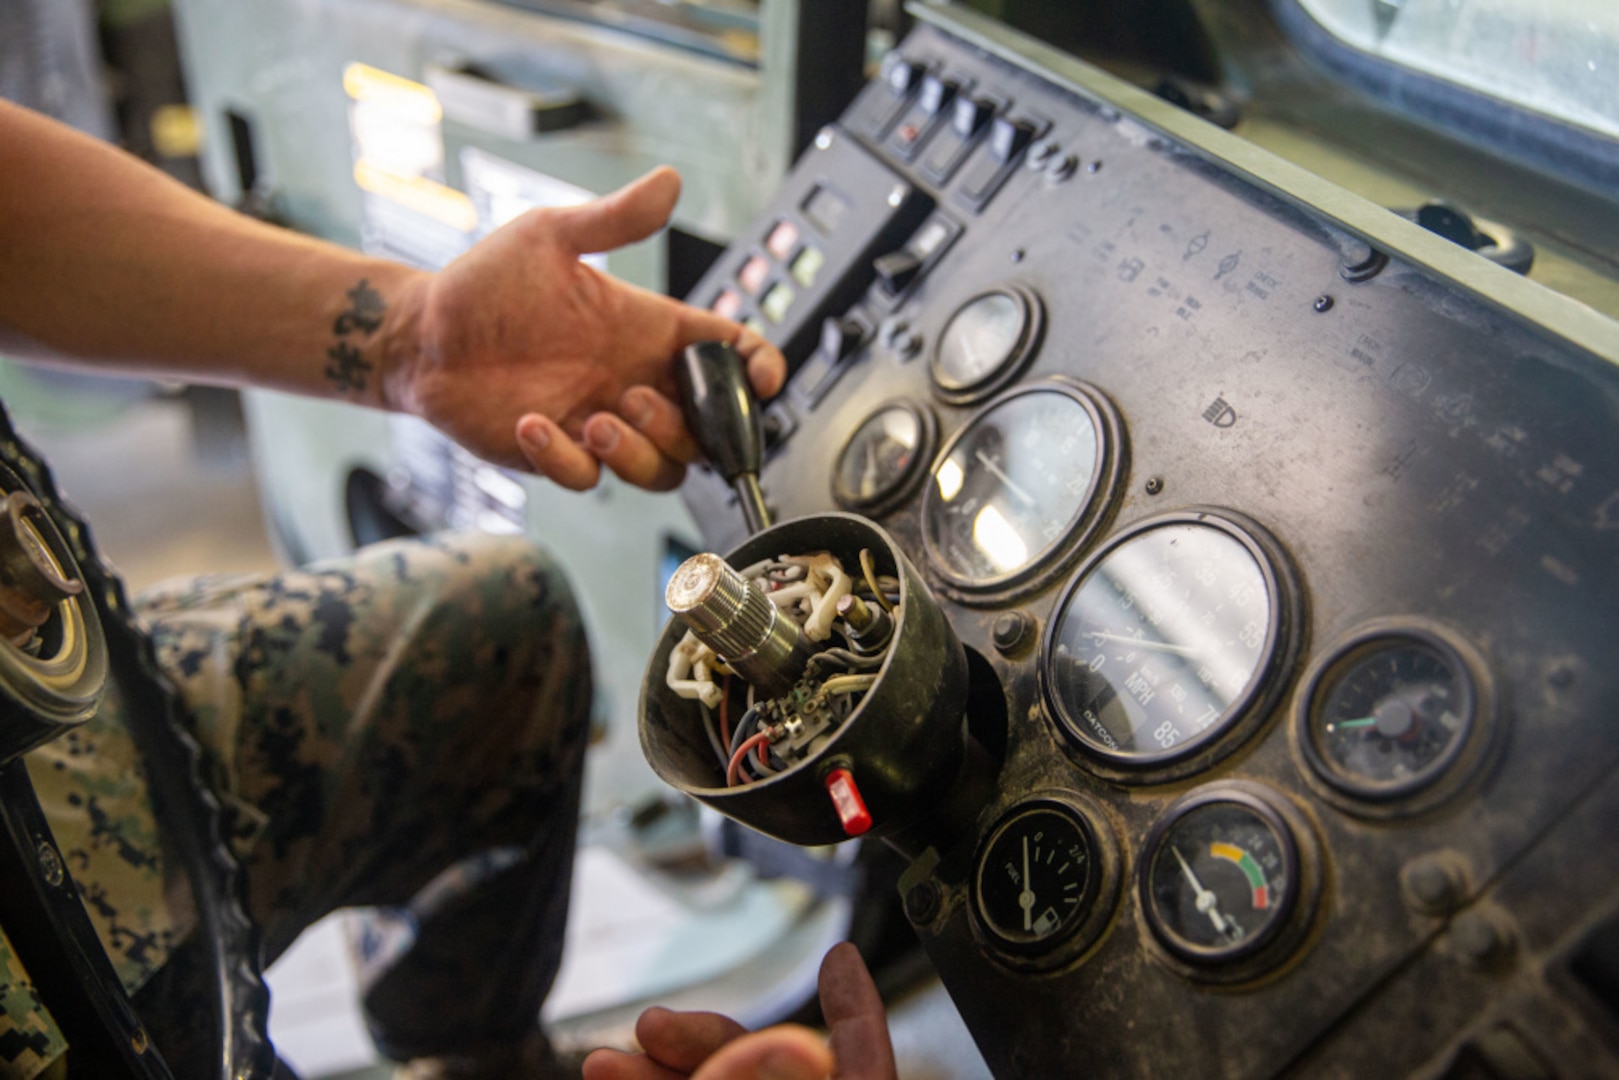 Staff Sgt. Kyle Owens, a motor transportation chief with Combat Logistics Battalion 5, 1st Marine Logistics Group, I Marine Expeditionary Force, shows the wire housing found inside that steering wheel column of the Medium Tactical Vehicle Replacements at Marine Corps Base Camp Pendleton, April 29, 2021. When troubleshooting lighting issues, mechanics are often required to remove the steering wheel to access the wiring. Traditionally, a 10-way slide hammer kit is used to remove the wheel, often cracking the column or warping the wheel in the process. Owens designed a tool that prevents any damage to the truck while removing the steering wheel that won him an Operational Agility Team award for the Innovation Challenge.